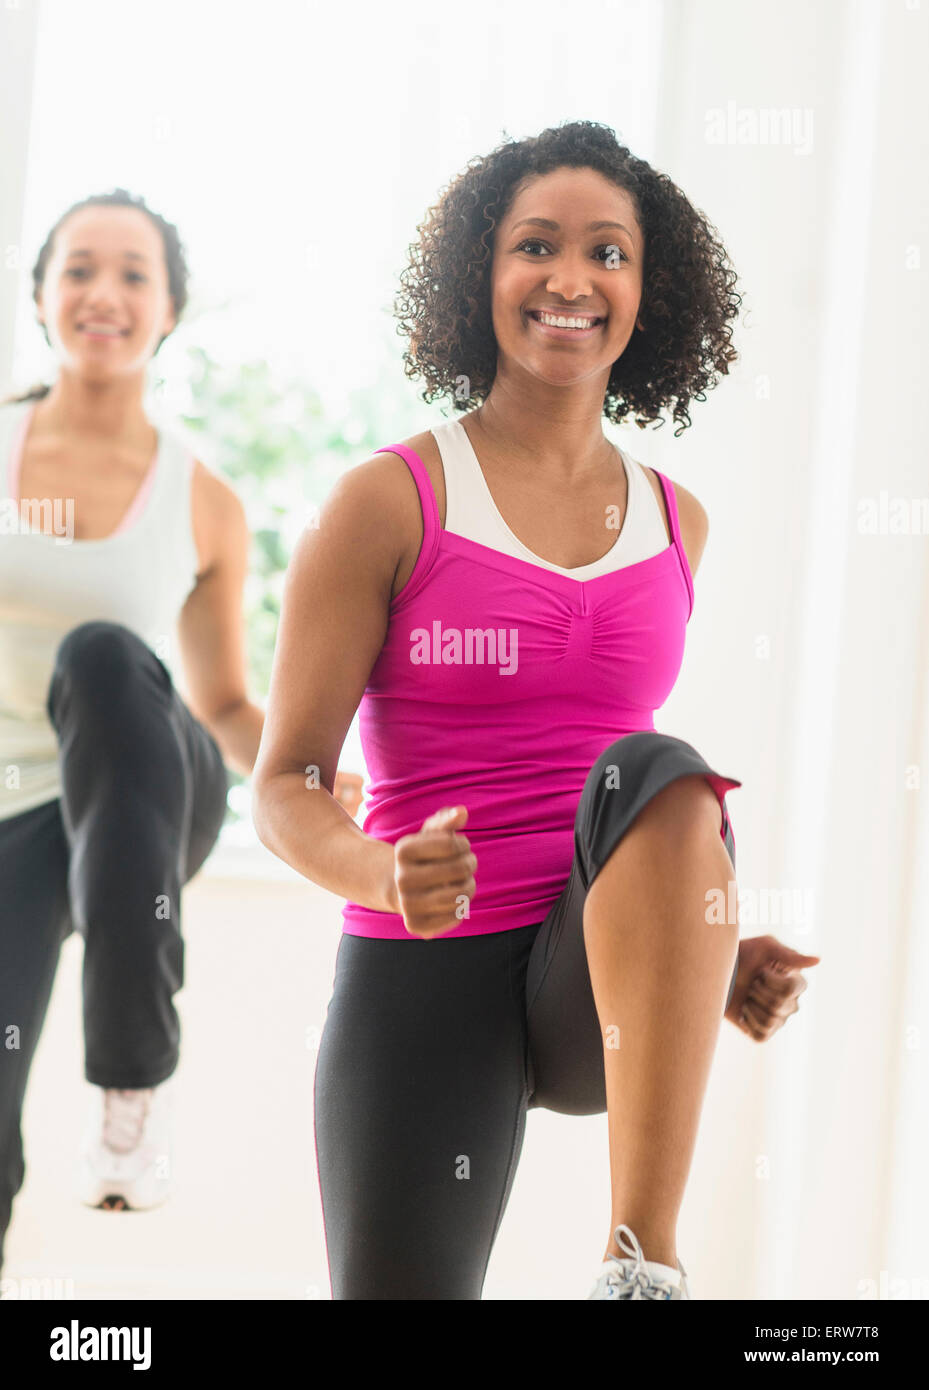 Women working out in exercise class Stock Photo